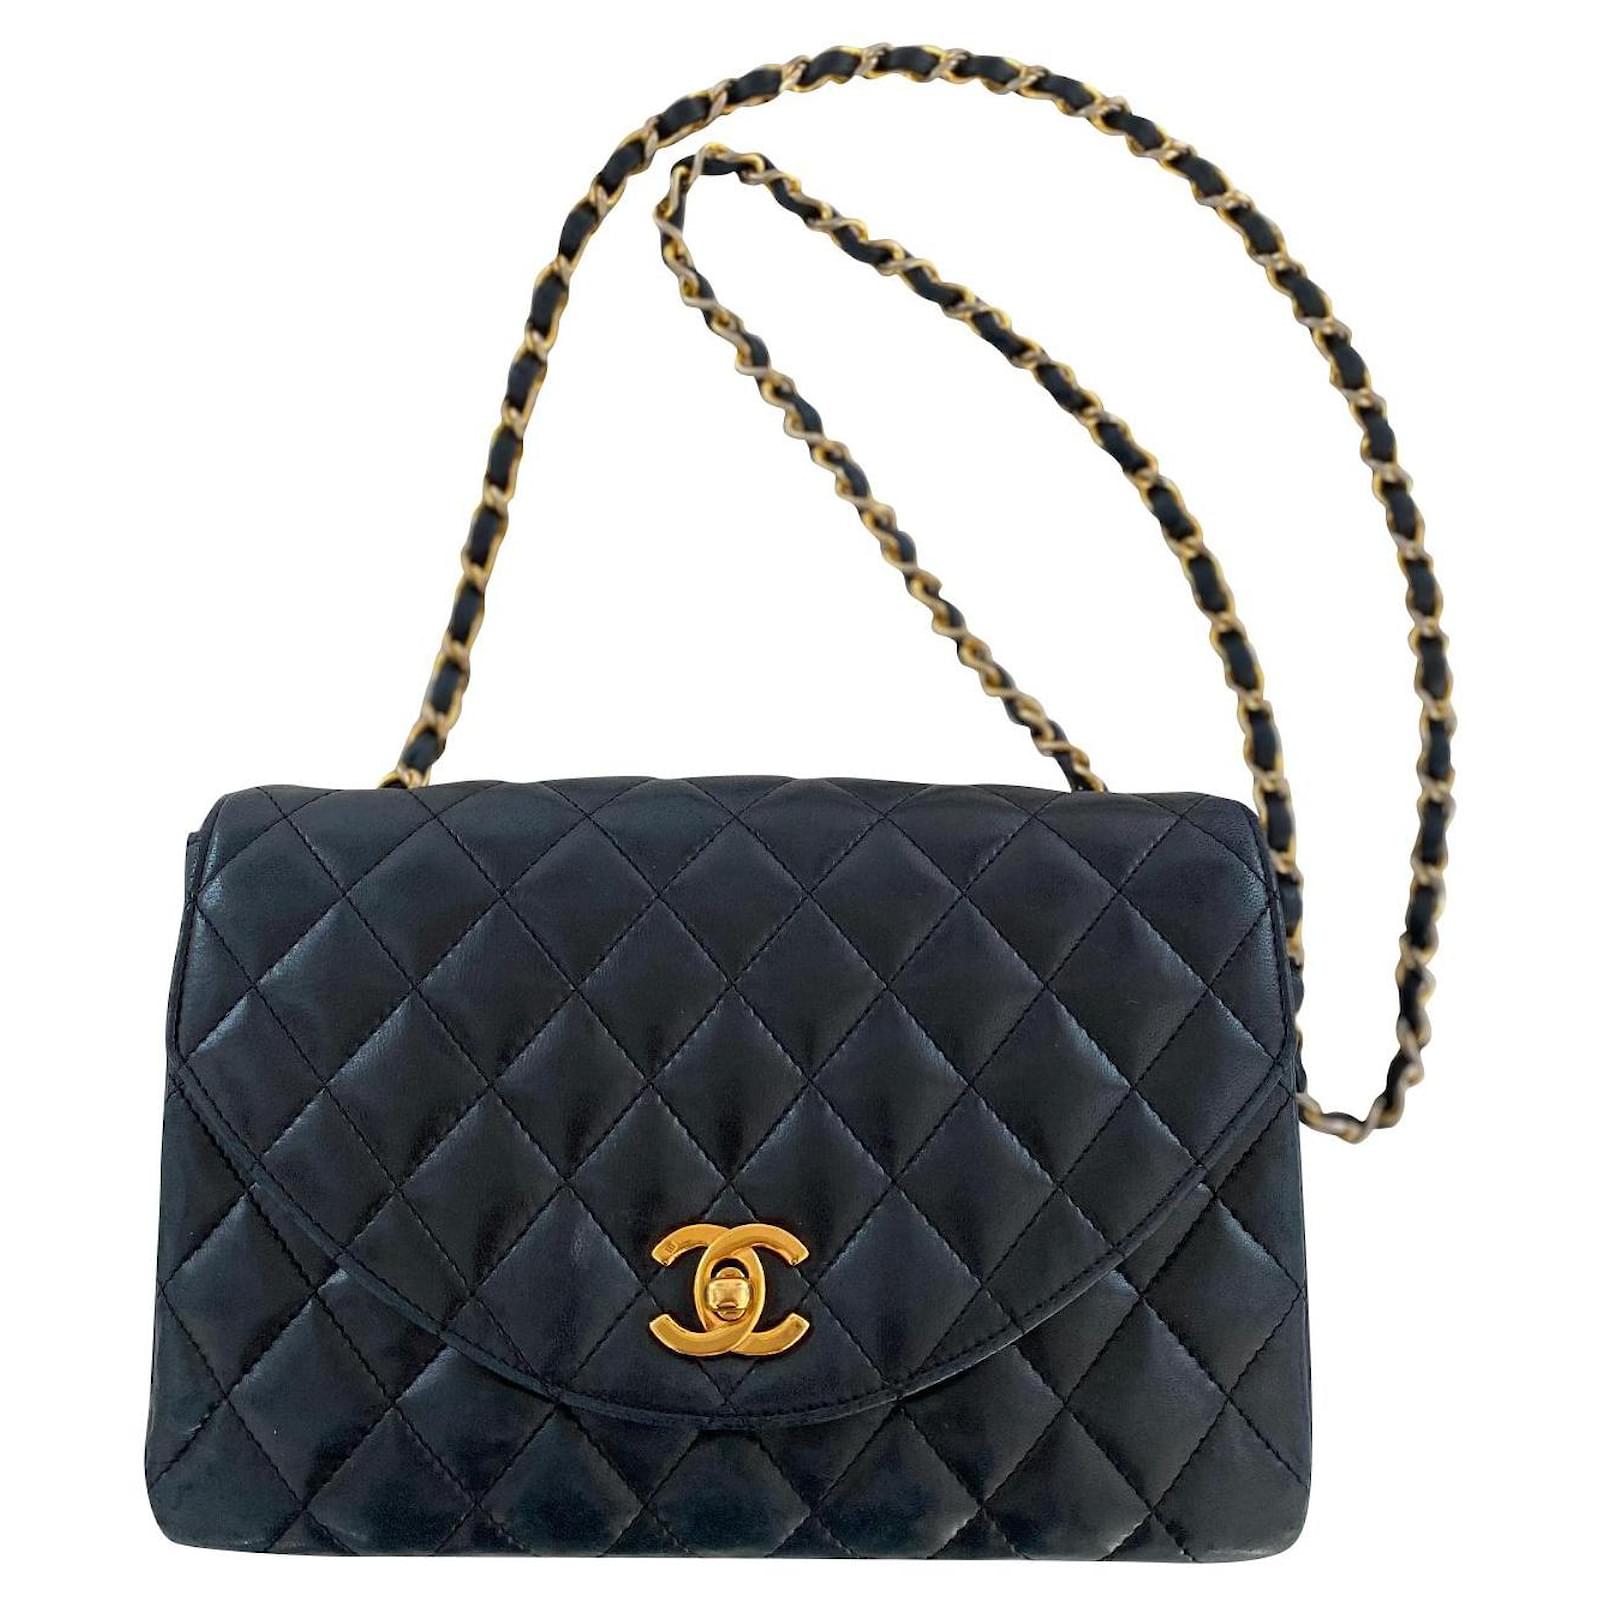 Chanel lambskin flap bag 9 , Used in good condition. It's really